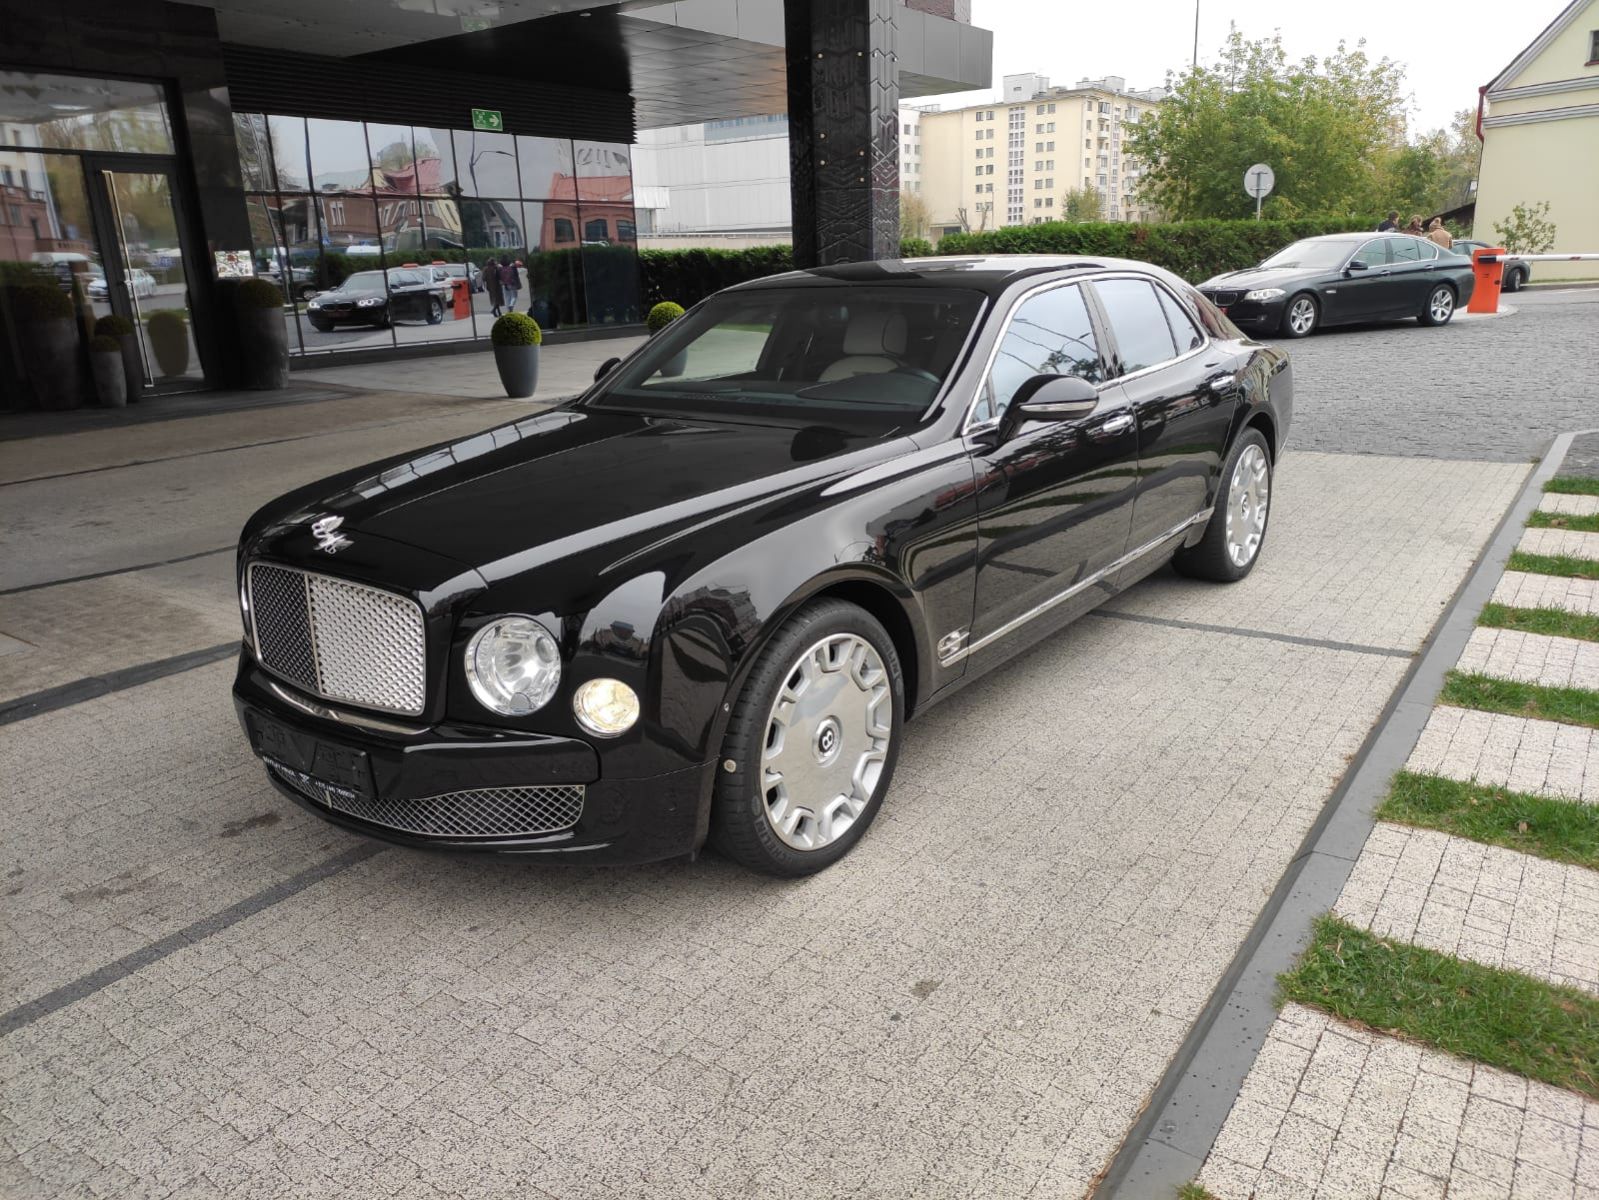 Bentley Mulsan rental. A premium car with a luxurious interior and impressive appearance.